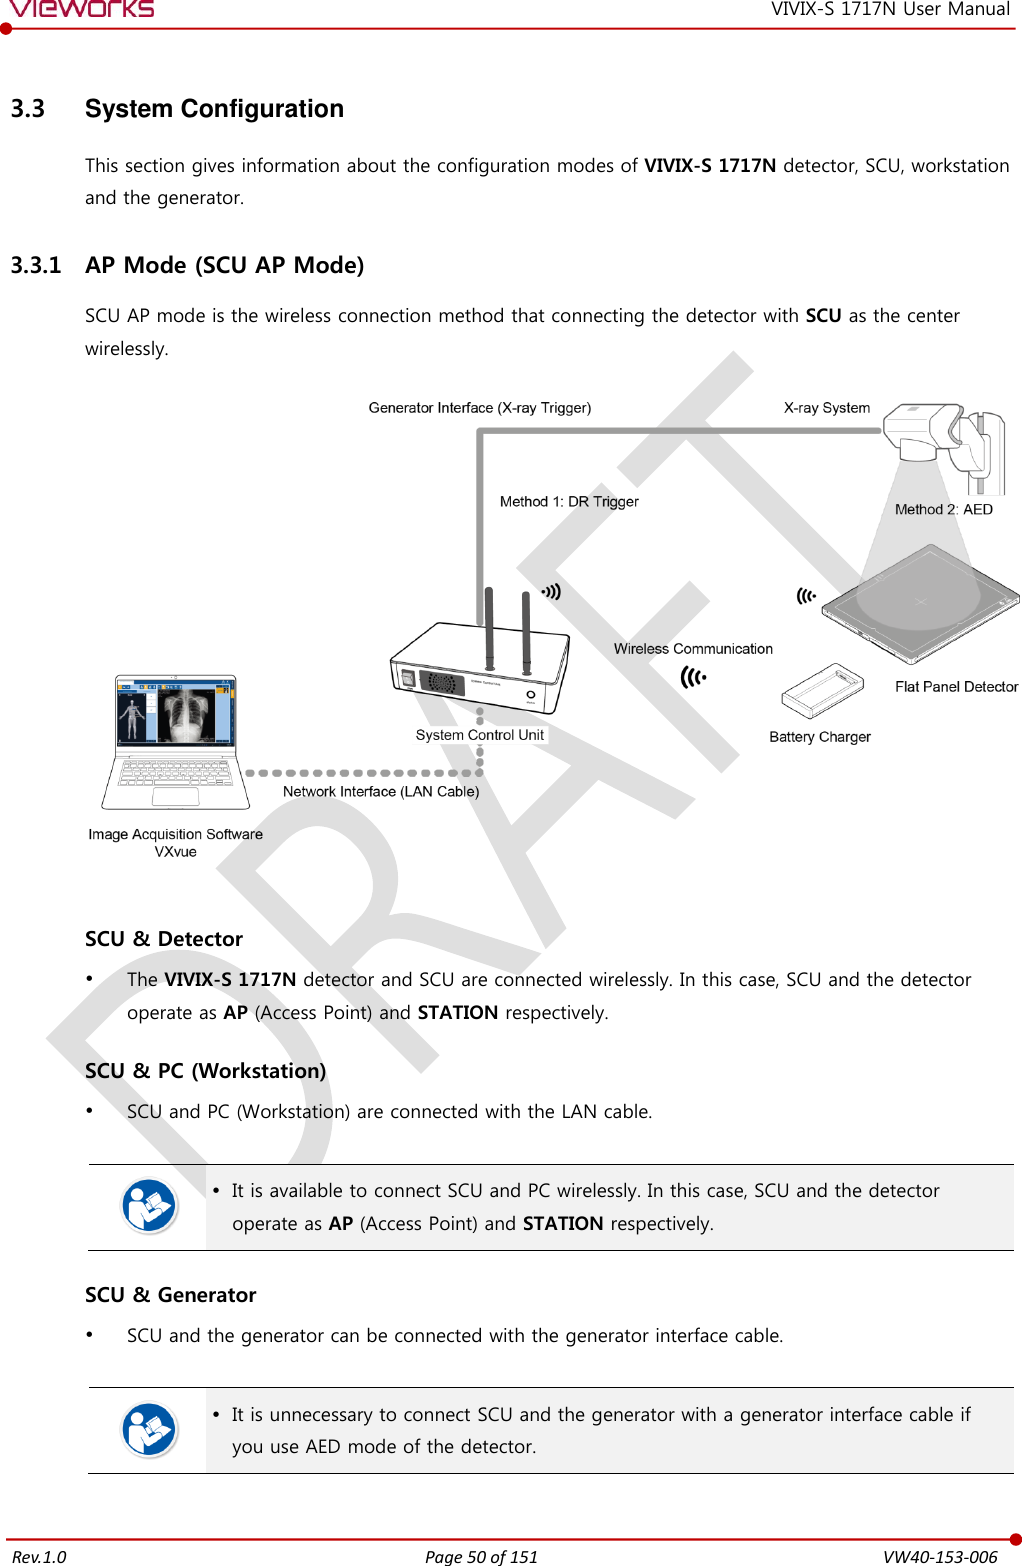   Rev.1.0 Page 50 of 151  VW40-153-006 VIVIX-S 1717N User Manual 3.3  System Configuration This section gives information about the configuration modes of VIVIX-S 1717N detector, SCU, workstation and the generator. 3.3.1 AP Mode (SCU AP Mode) SCU AP mode is the wireless connection method that connecting the detector with SCU as the center wirelessly.     SCU &amp; Detector  The VIVIX-S 1717N detector and SCU are connected wirelessly. In this case, SCU and the detector operate as AP (Access Point) and STATION respectively.  SCU &amp; PC (Workstation)  SCU and PC (Workstation) are connected with the LAN cable.    It is available to connect SCU and PC wirelessly. In this case, SCU and the detector operate as AP (Access Point) and STATION respectively.  SCU &amp; Generator  SCU and the generator can be connected with the generator interface cable.    It is unnecessary to connect SCU and the generator with a generator interface cable if you use AED mode of the detector.  